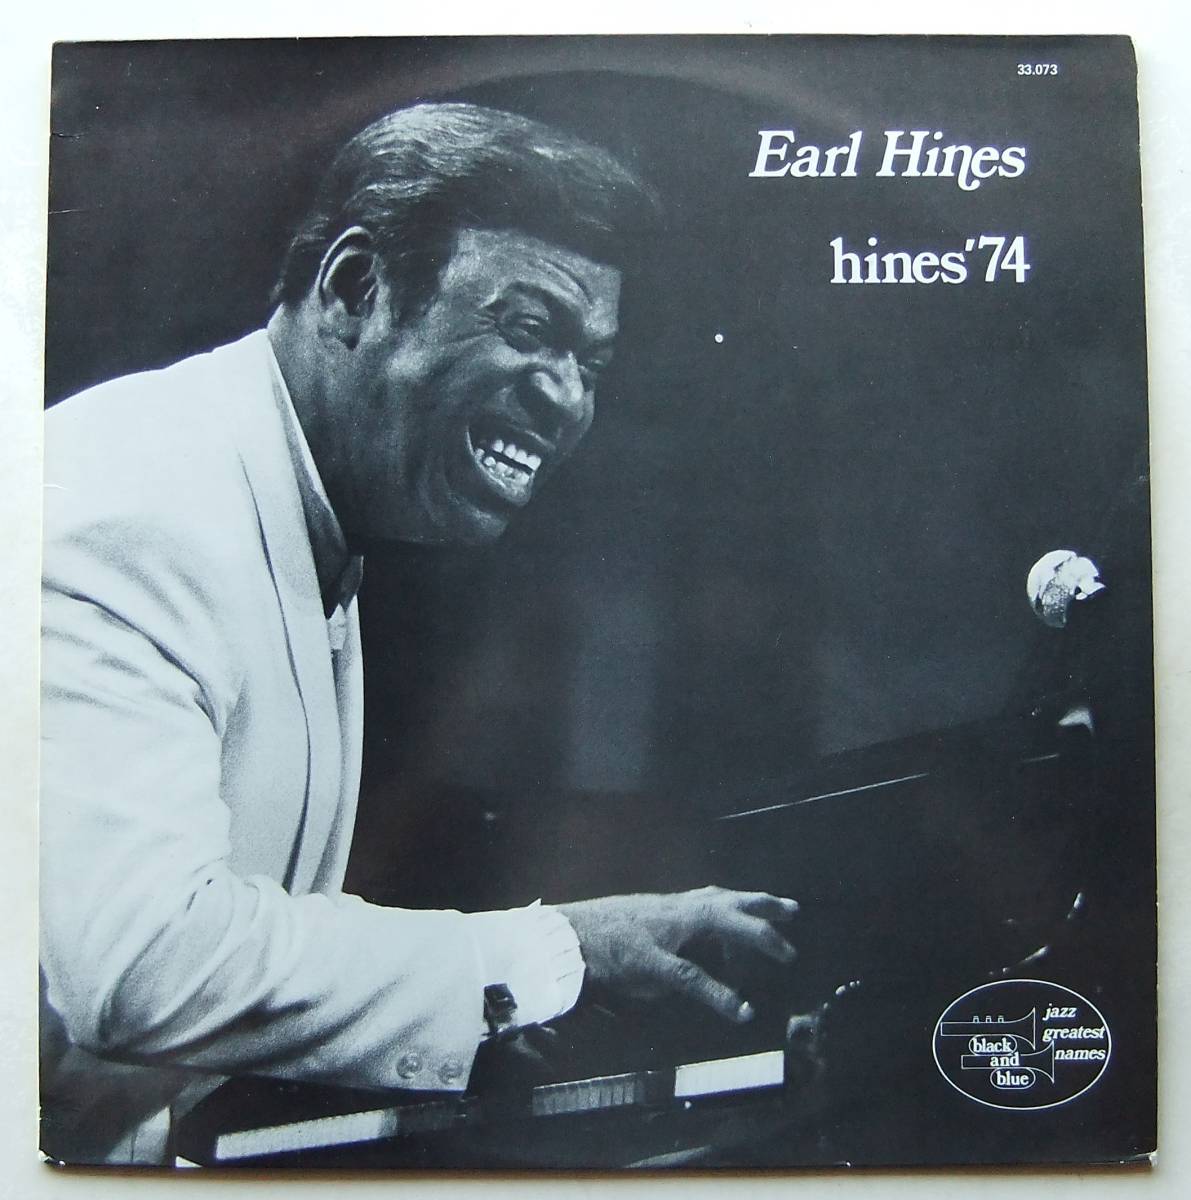 ◆ EARL HINES / Hines '74 ◆ Black and Blue 33.073 (France) ◆の画像1